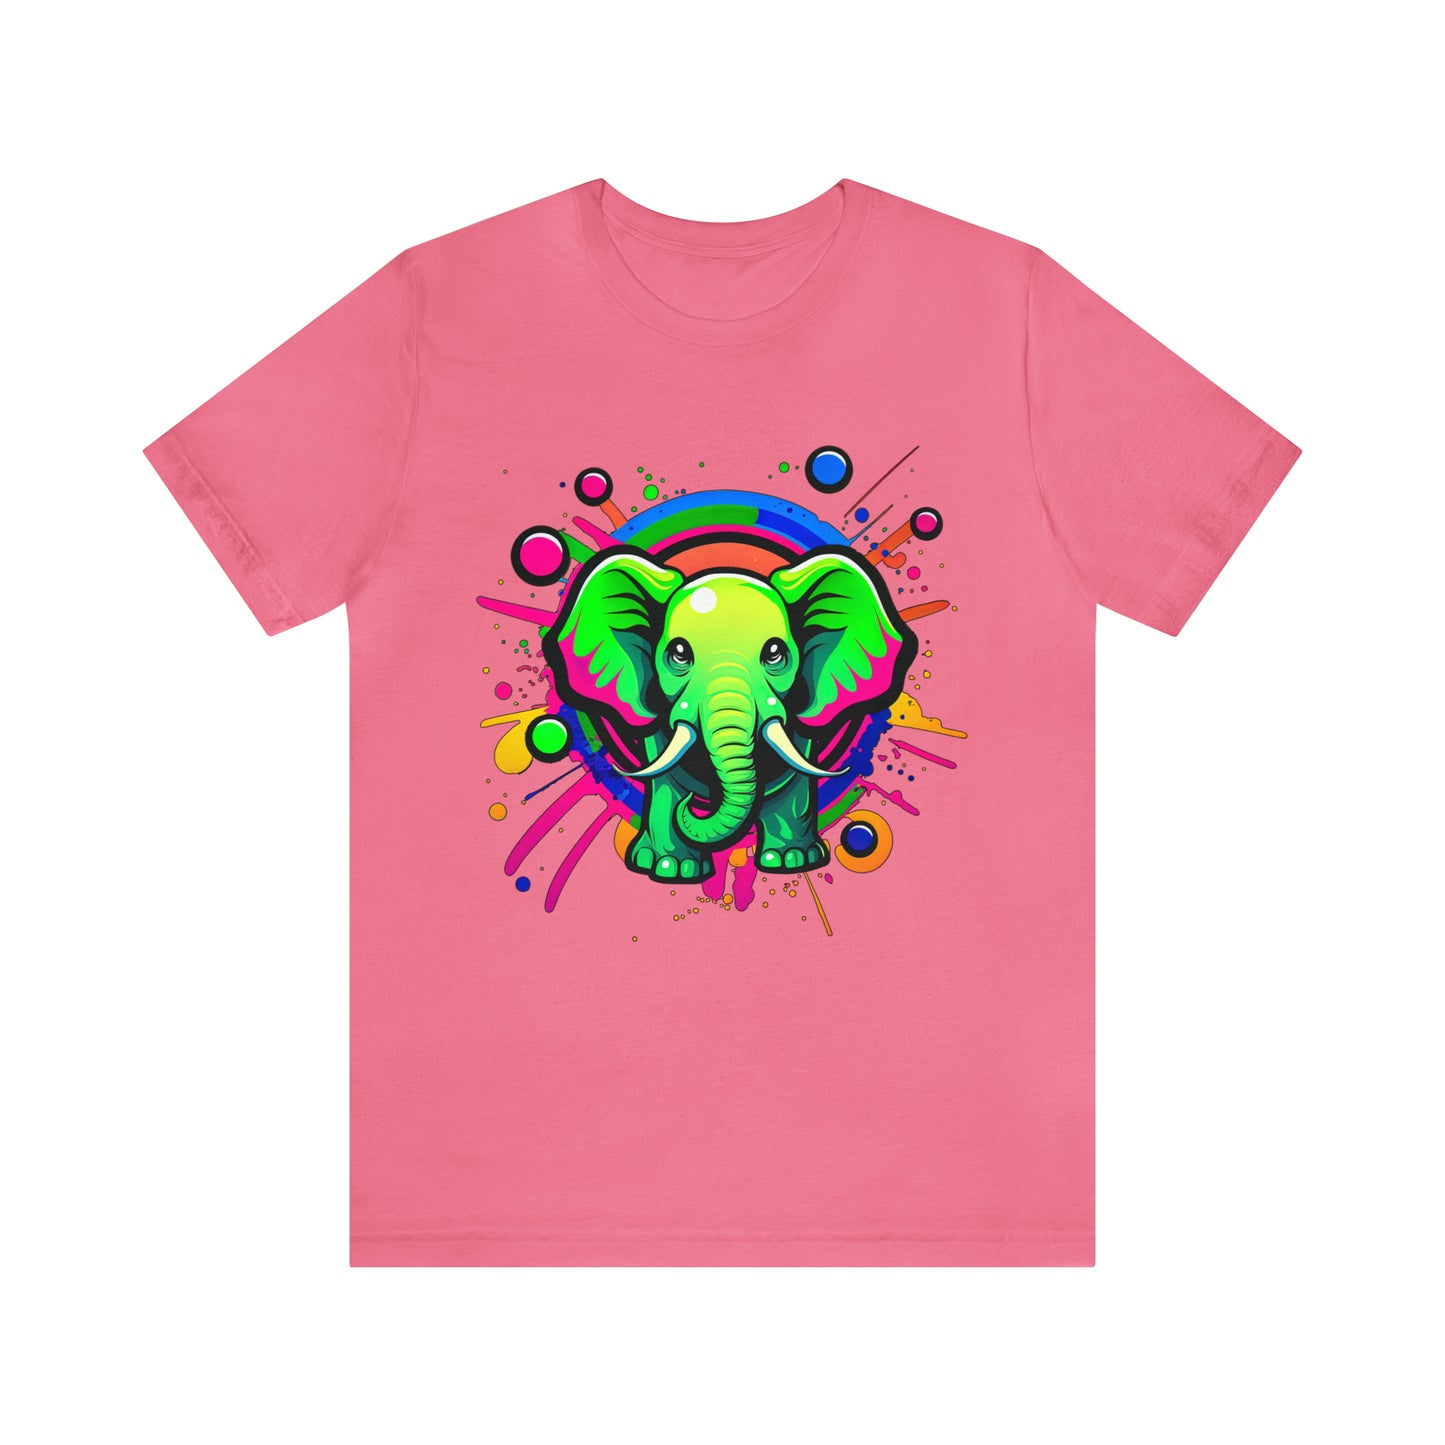 psychedelicBRANDz's Elephantasia Dream featuring an elephant on a pink shirt